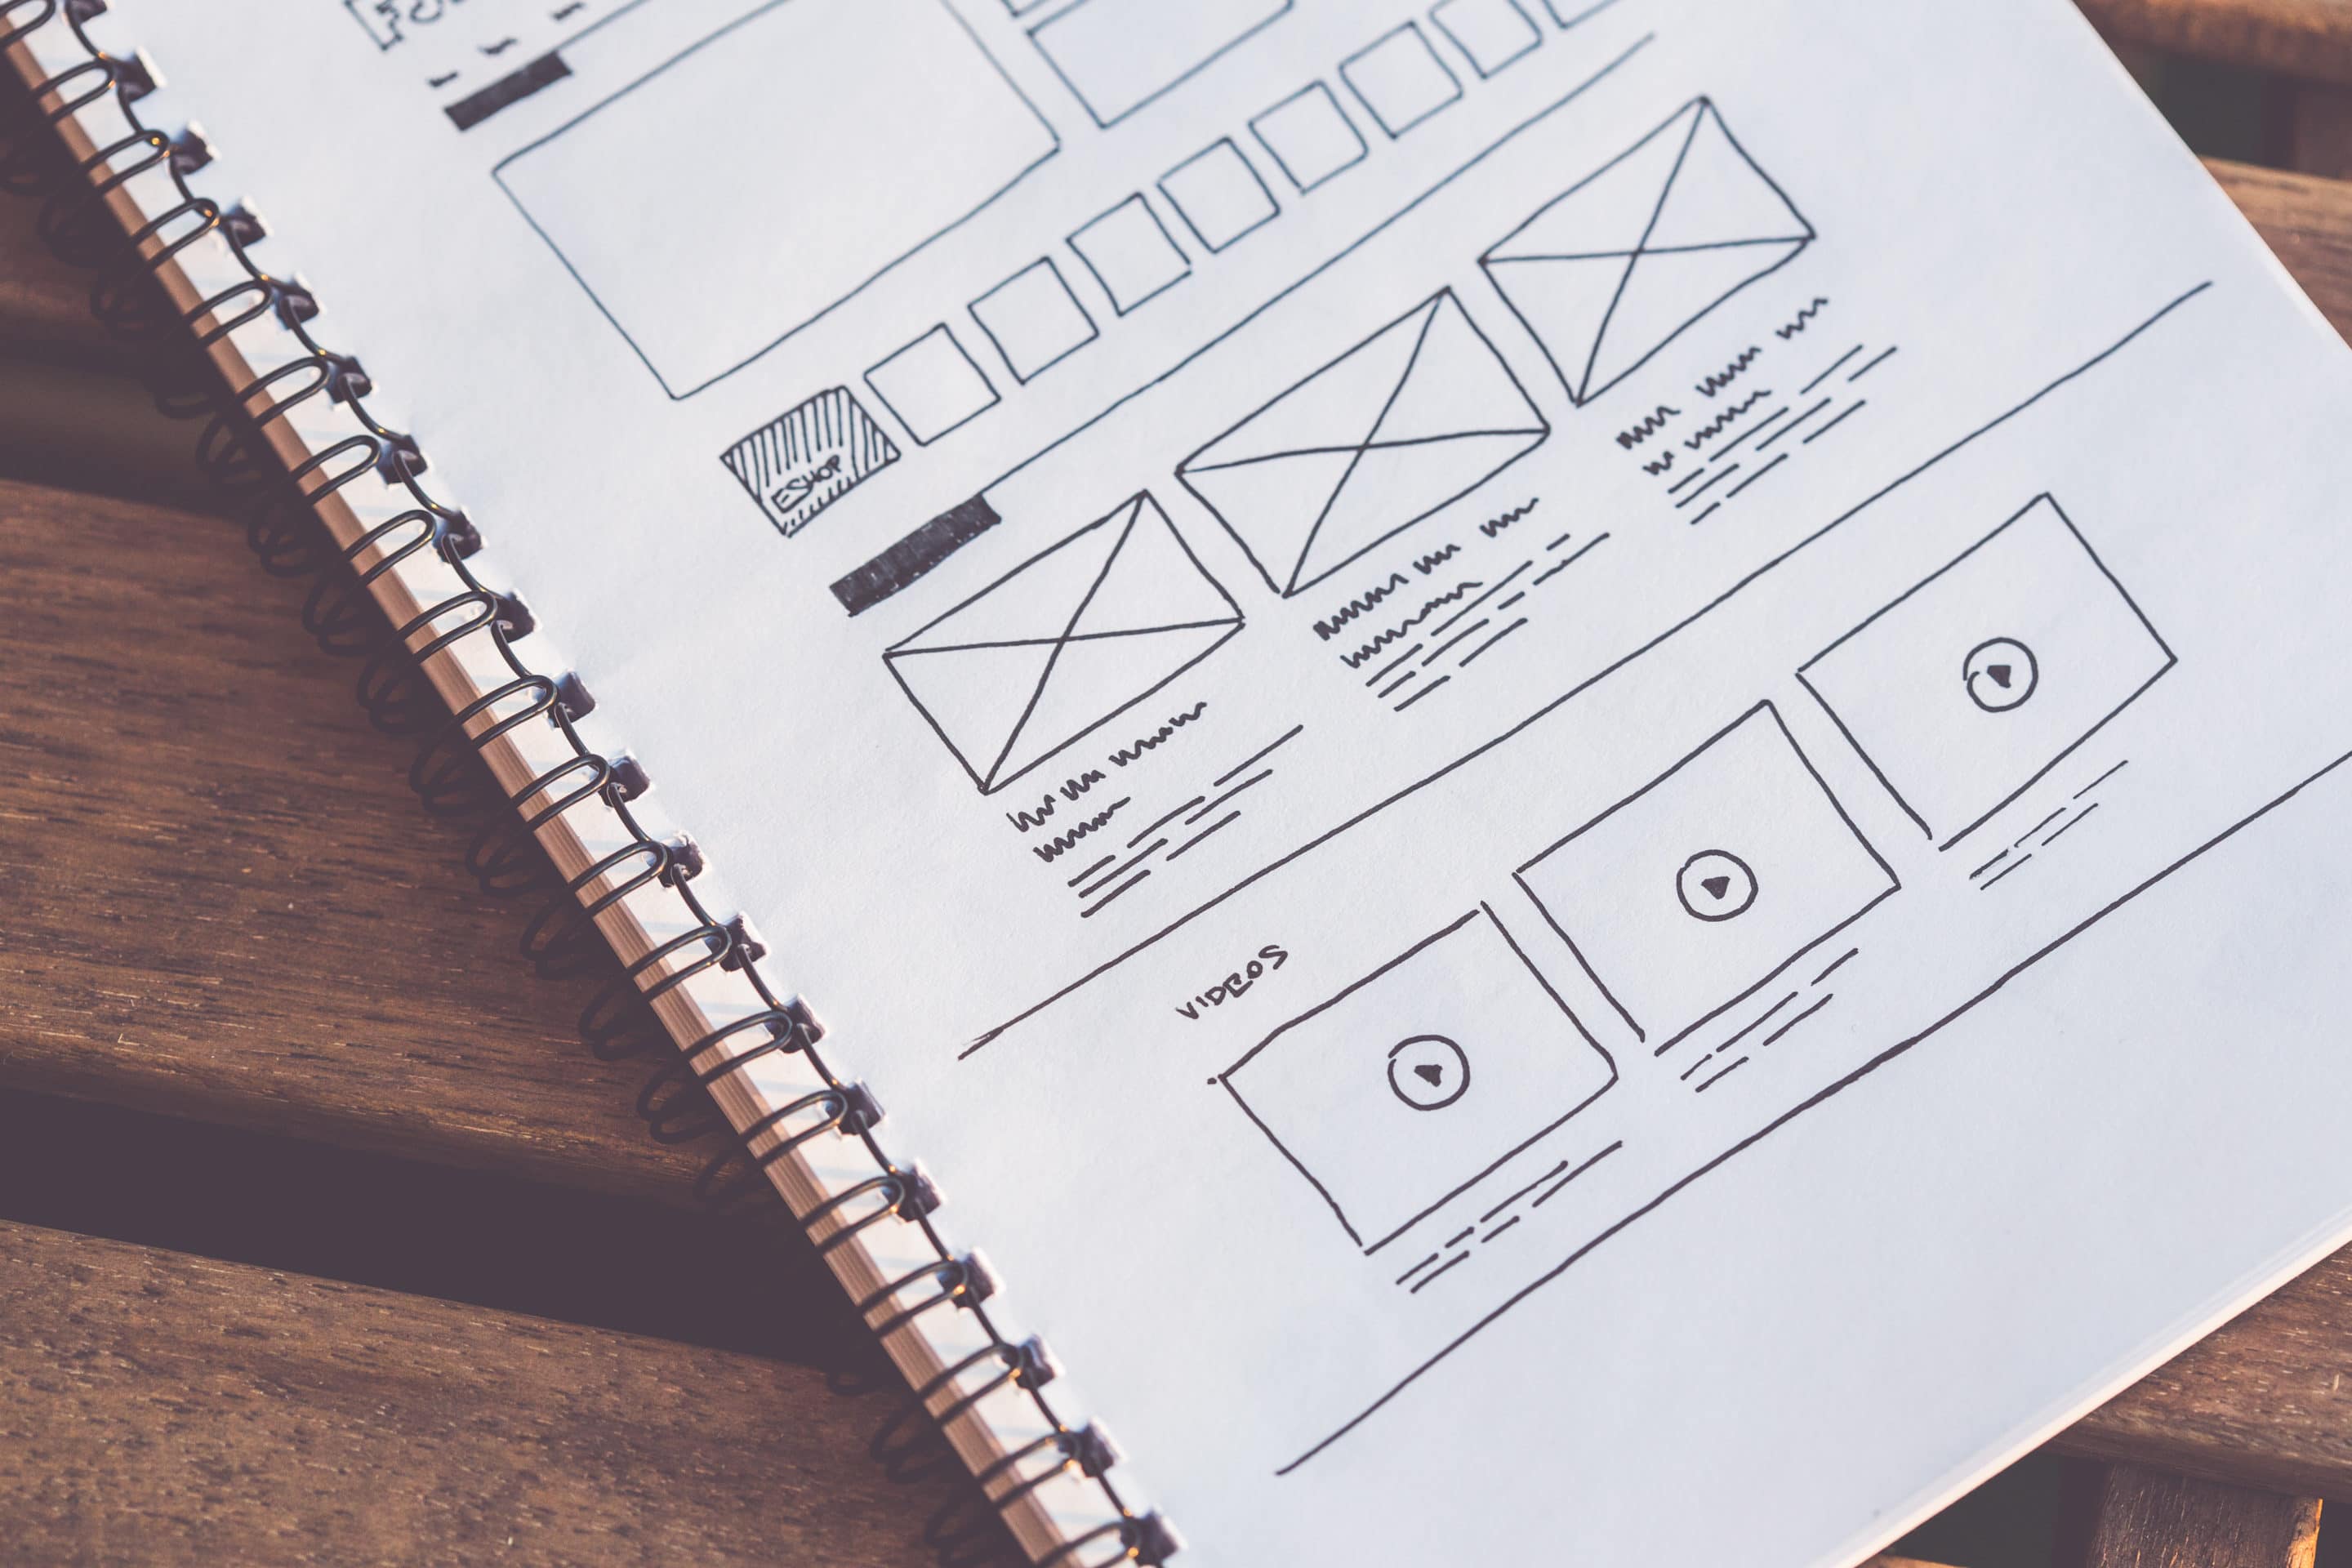 6 New Website Design Concepts to Get Your Business Noticed